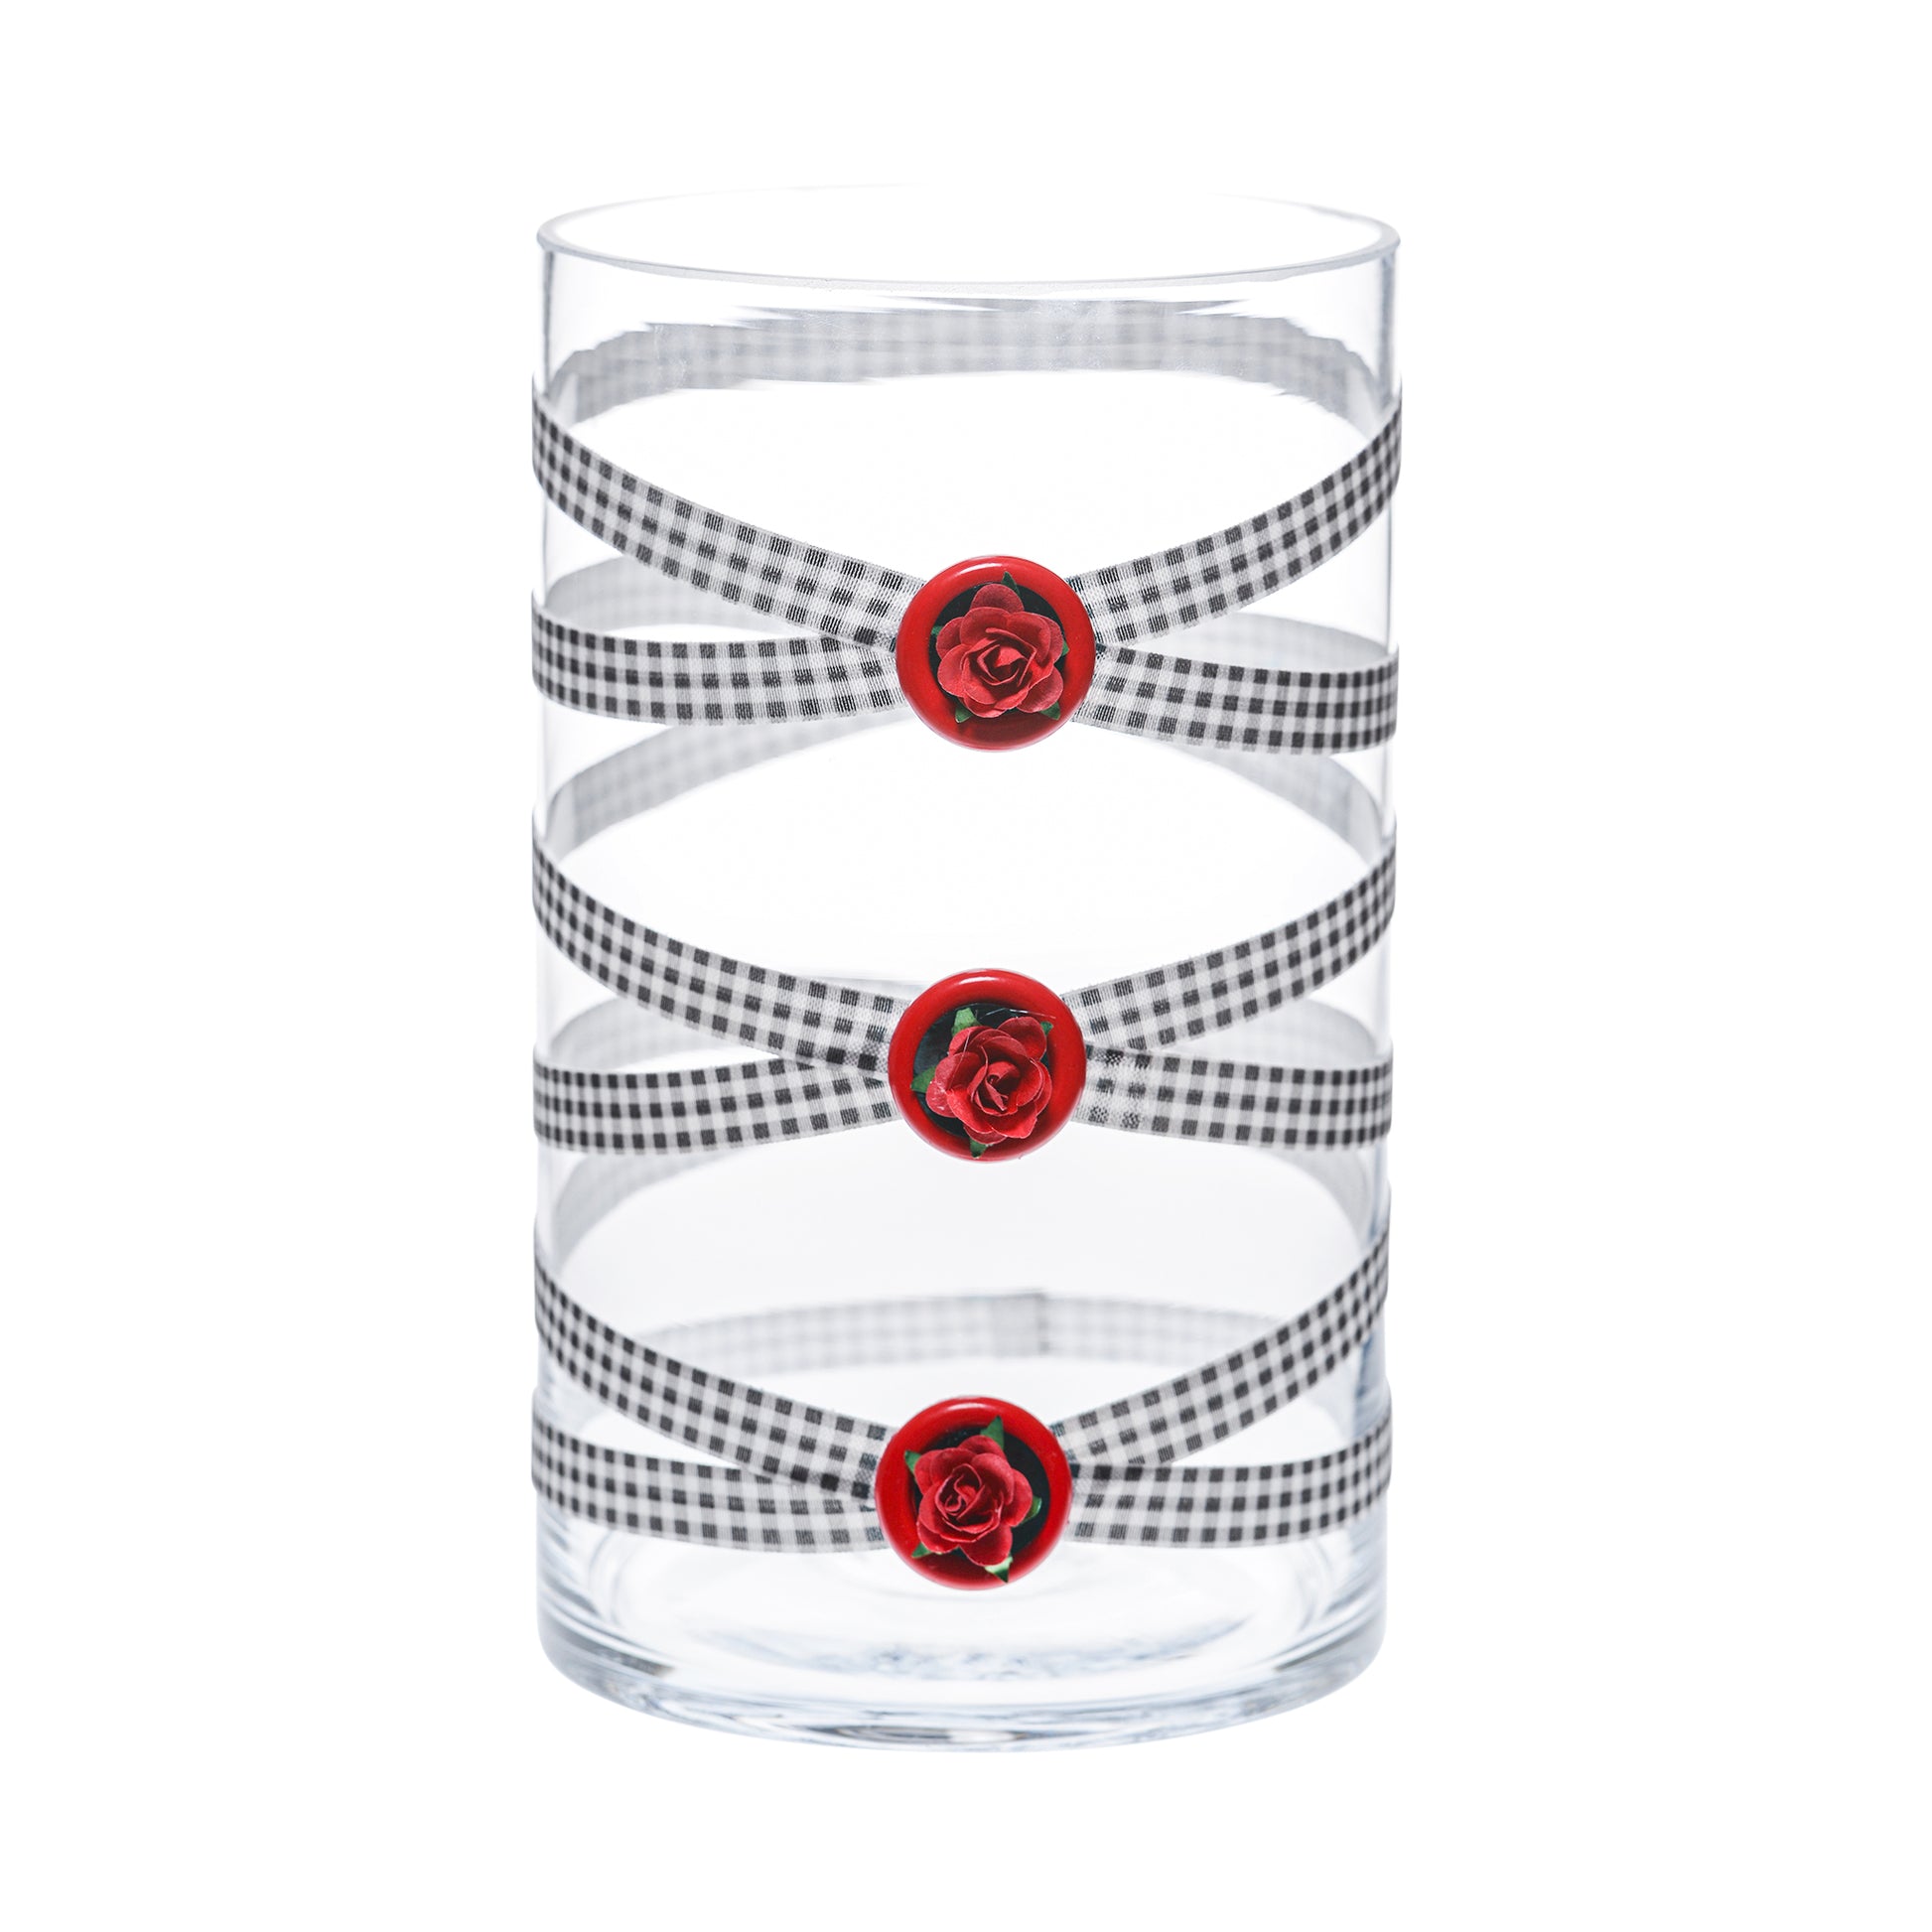 Front of Glass Wrappings' 6" x 10" cylinder wrapped in black & white check elastic, decorated with 3 red roses.